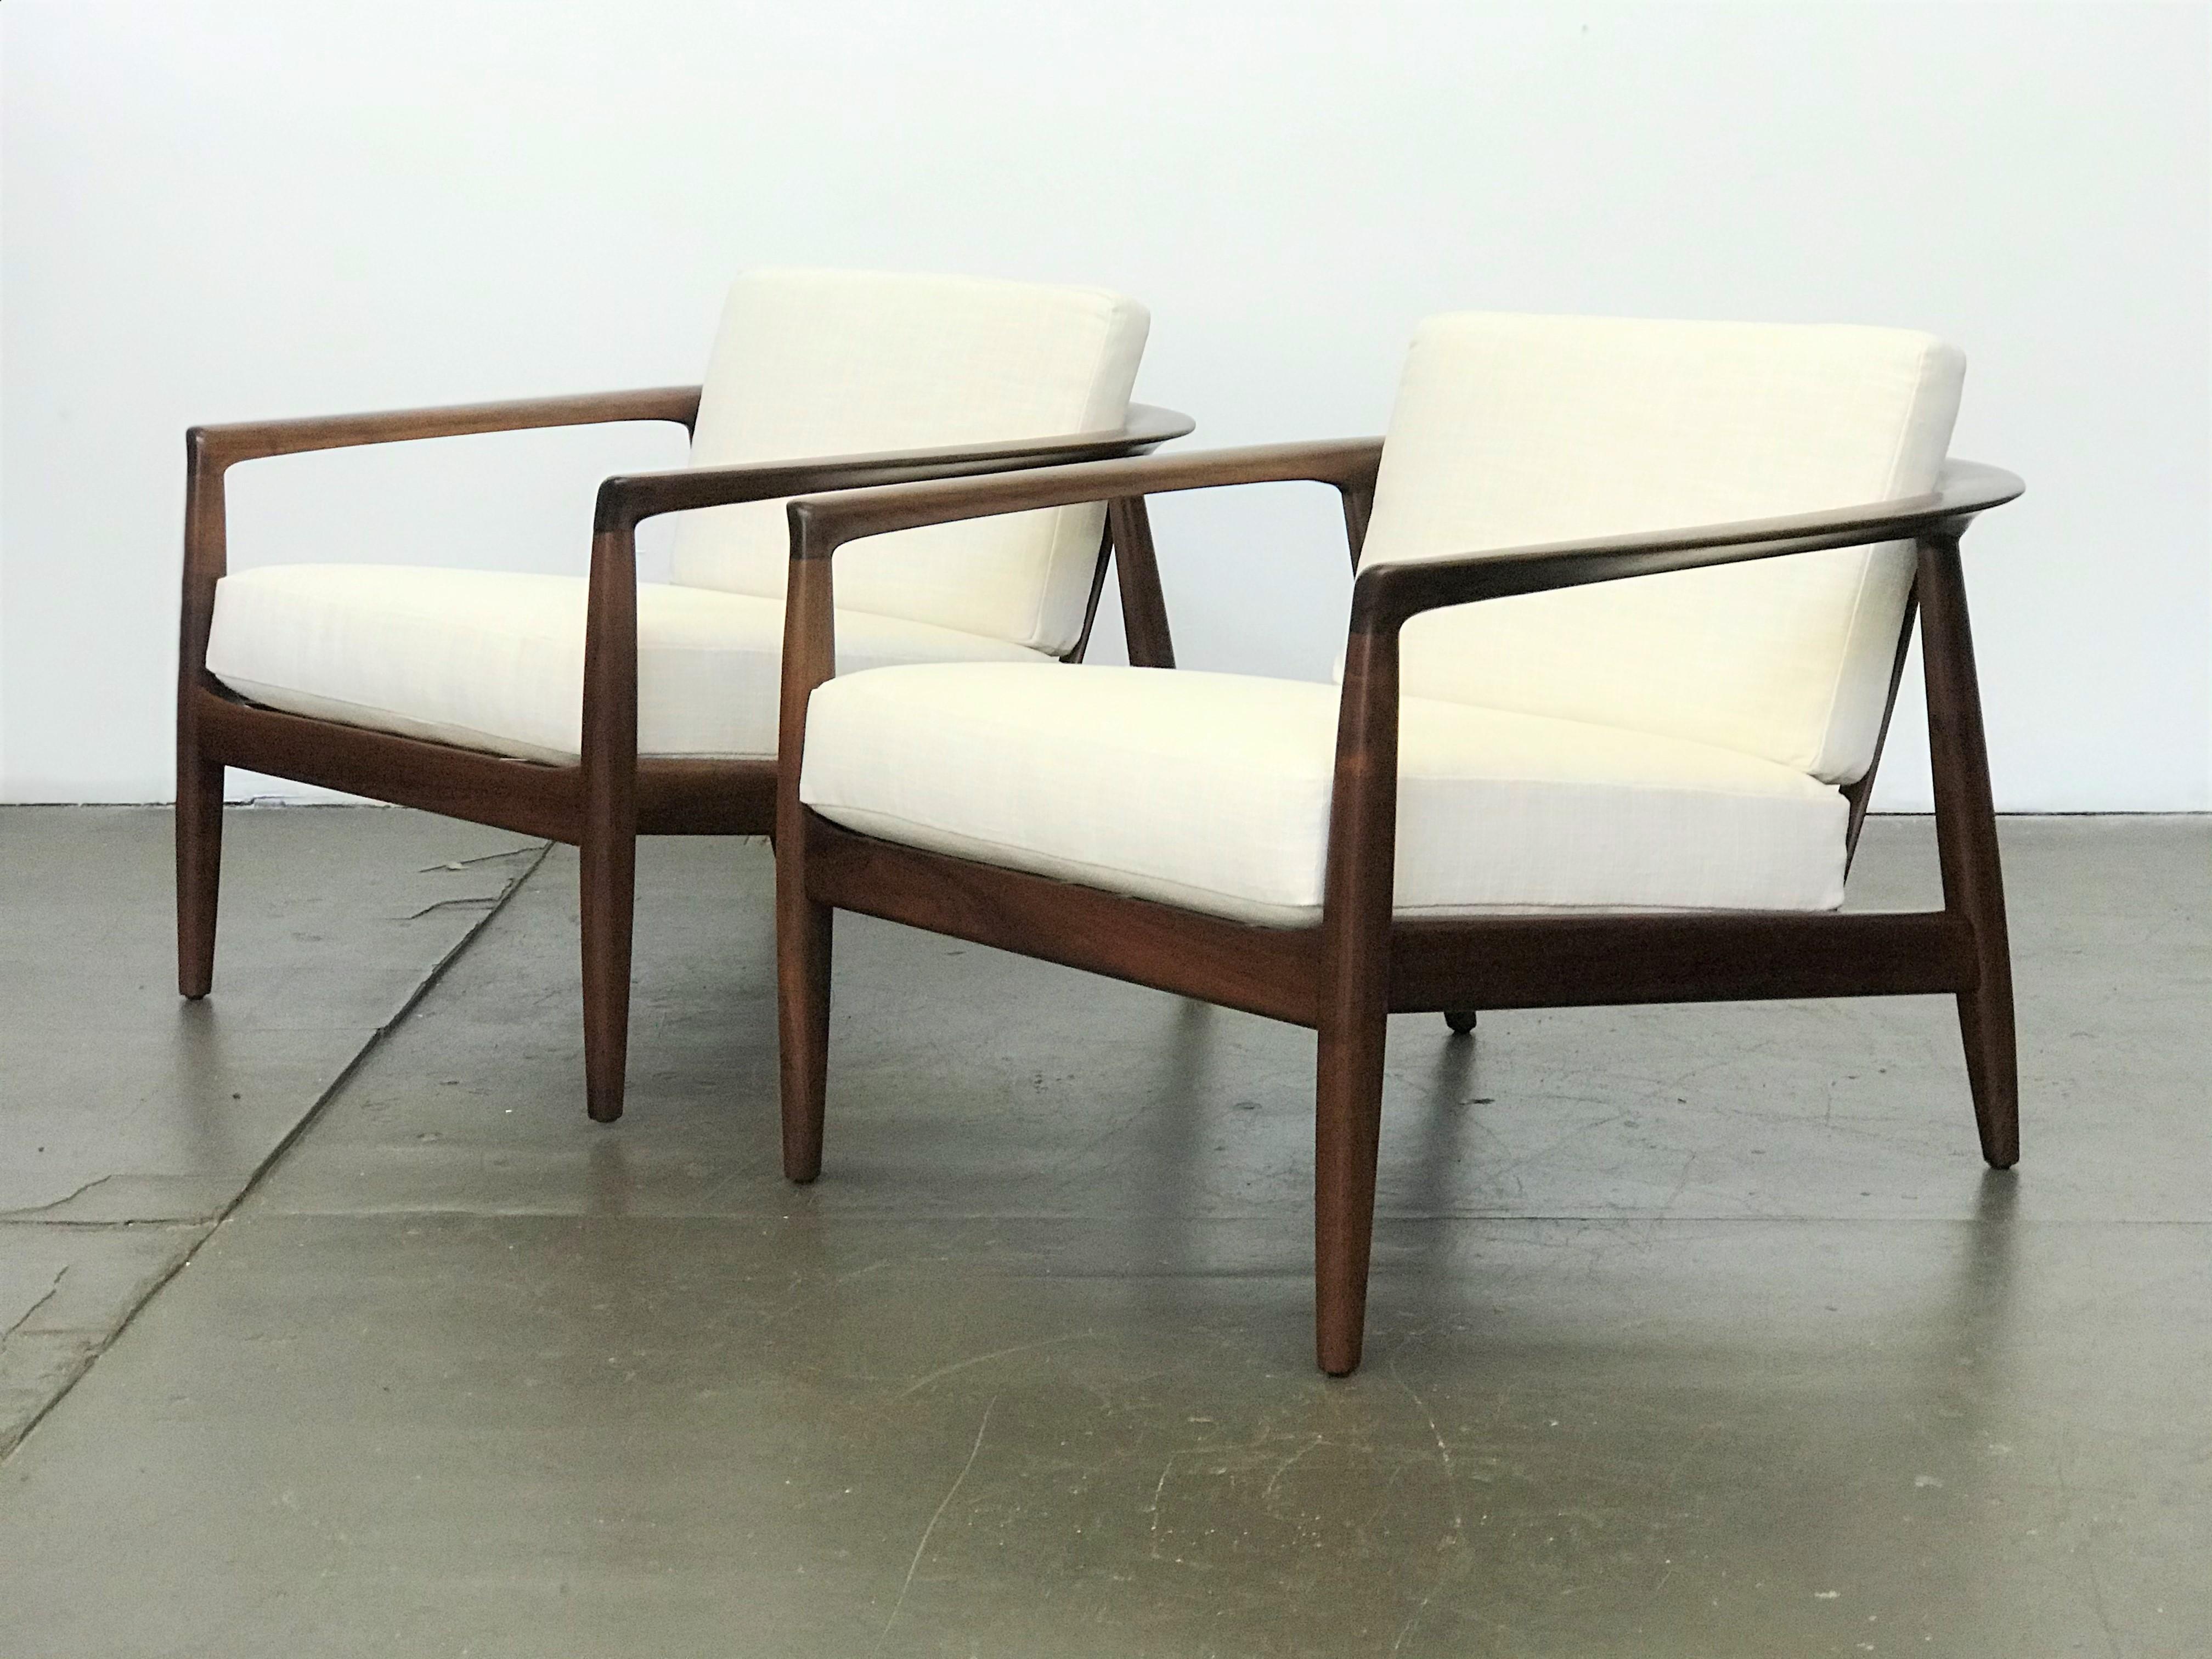 Excellent pair of walnut Swedish Modern low-profile slat back lounge chairs by Folke Ohlsson for Dux - 1950's. Model 72-C. Refinished walnut frames. New straps and cushions with off-white linen upholstery. These striking chairs have wonderful lines